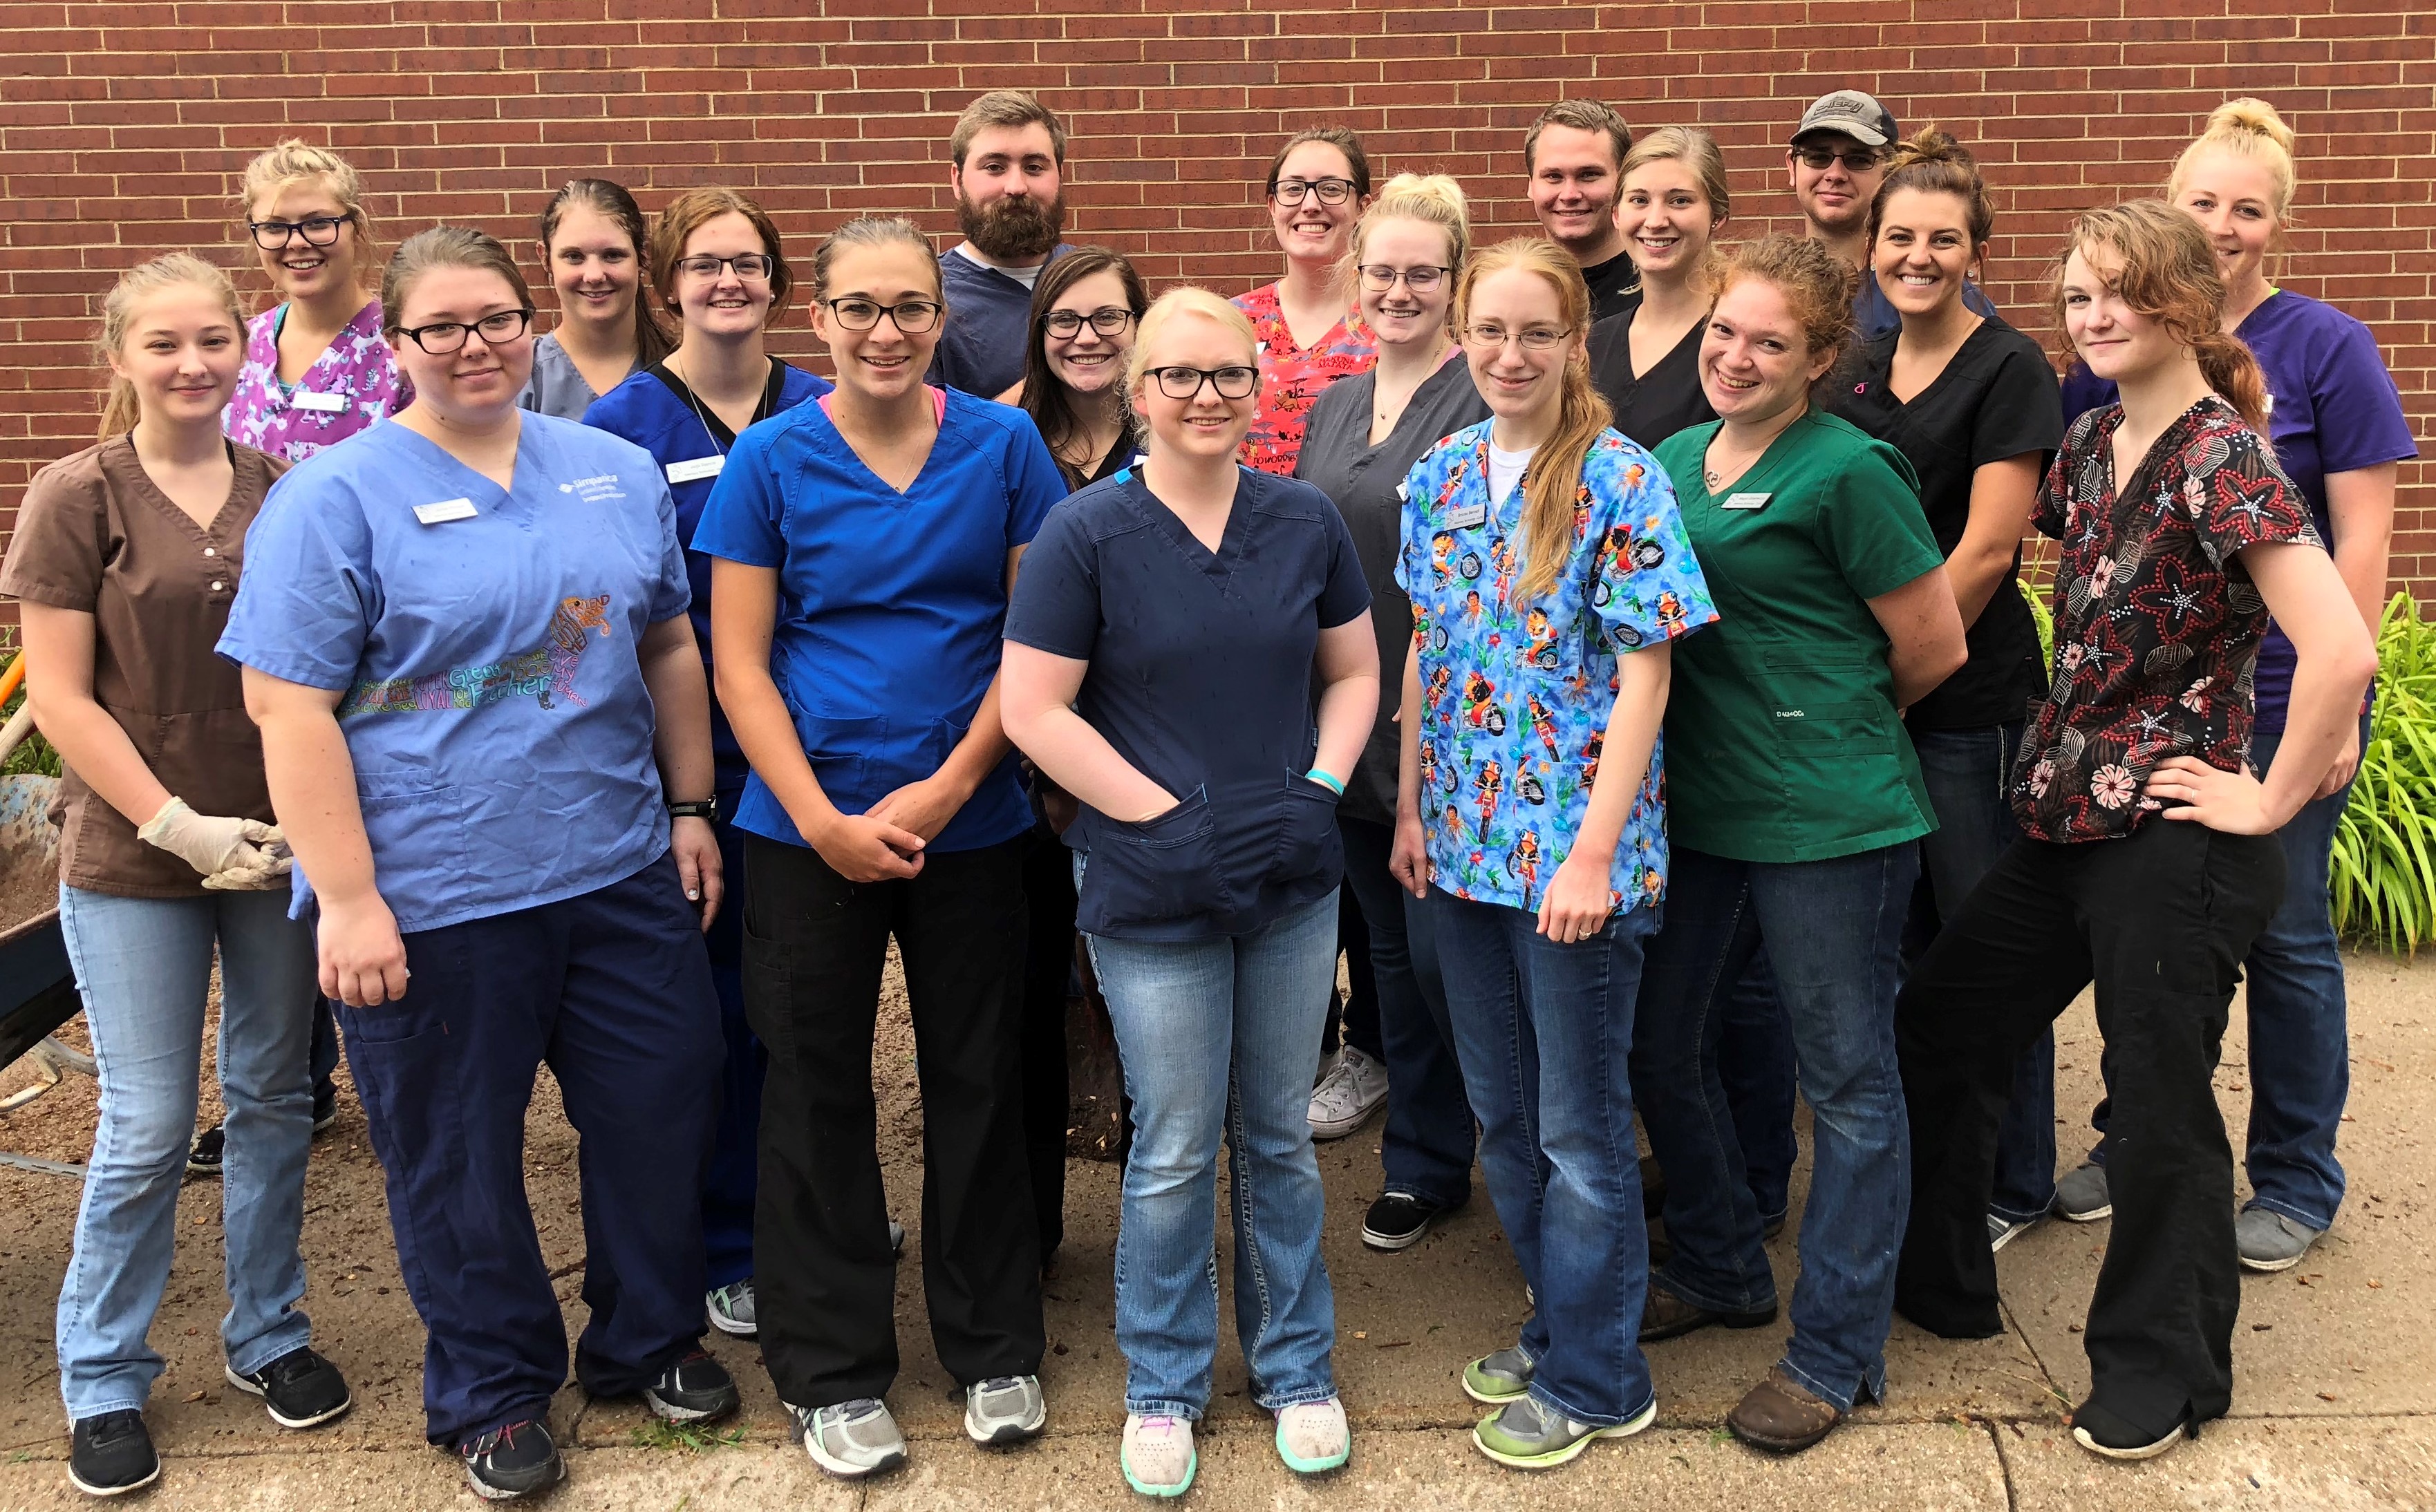 Veterinary technology students will complete their summer session on Friday. Recently, students from radiology and parasitology courses pitched in for campus cleanup around the NCTA Vet Tech complex. (NCTA photo)